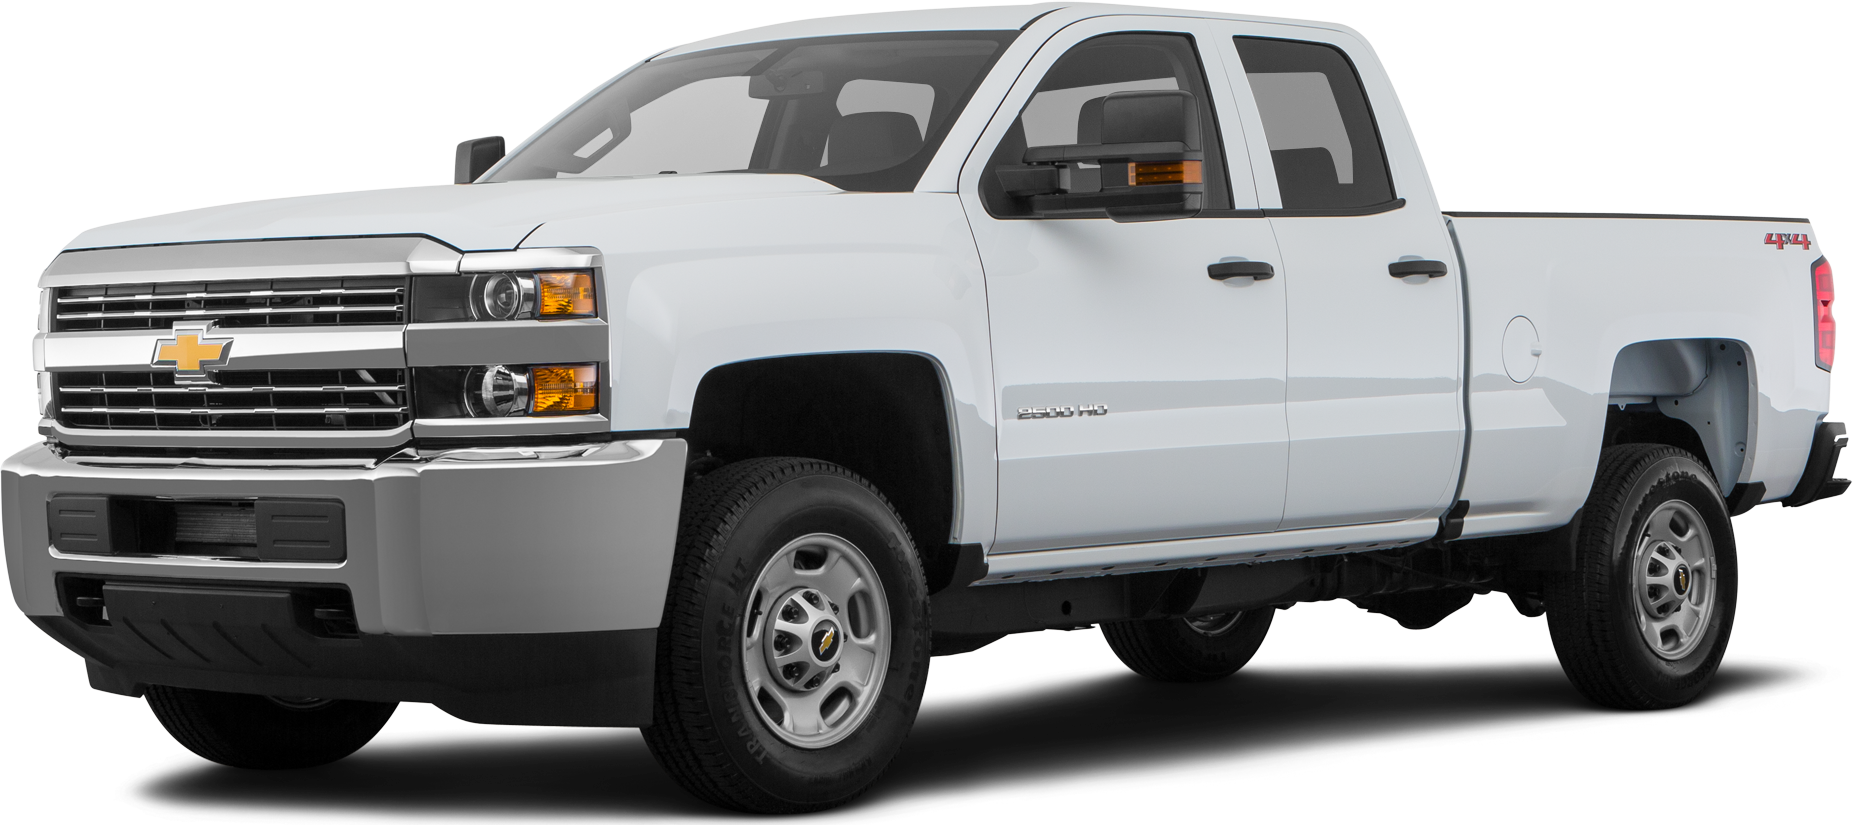 2019 Chevy Silverado 2500 Price Value Ratings And Reviews Kelley Blue